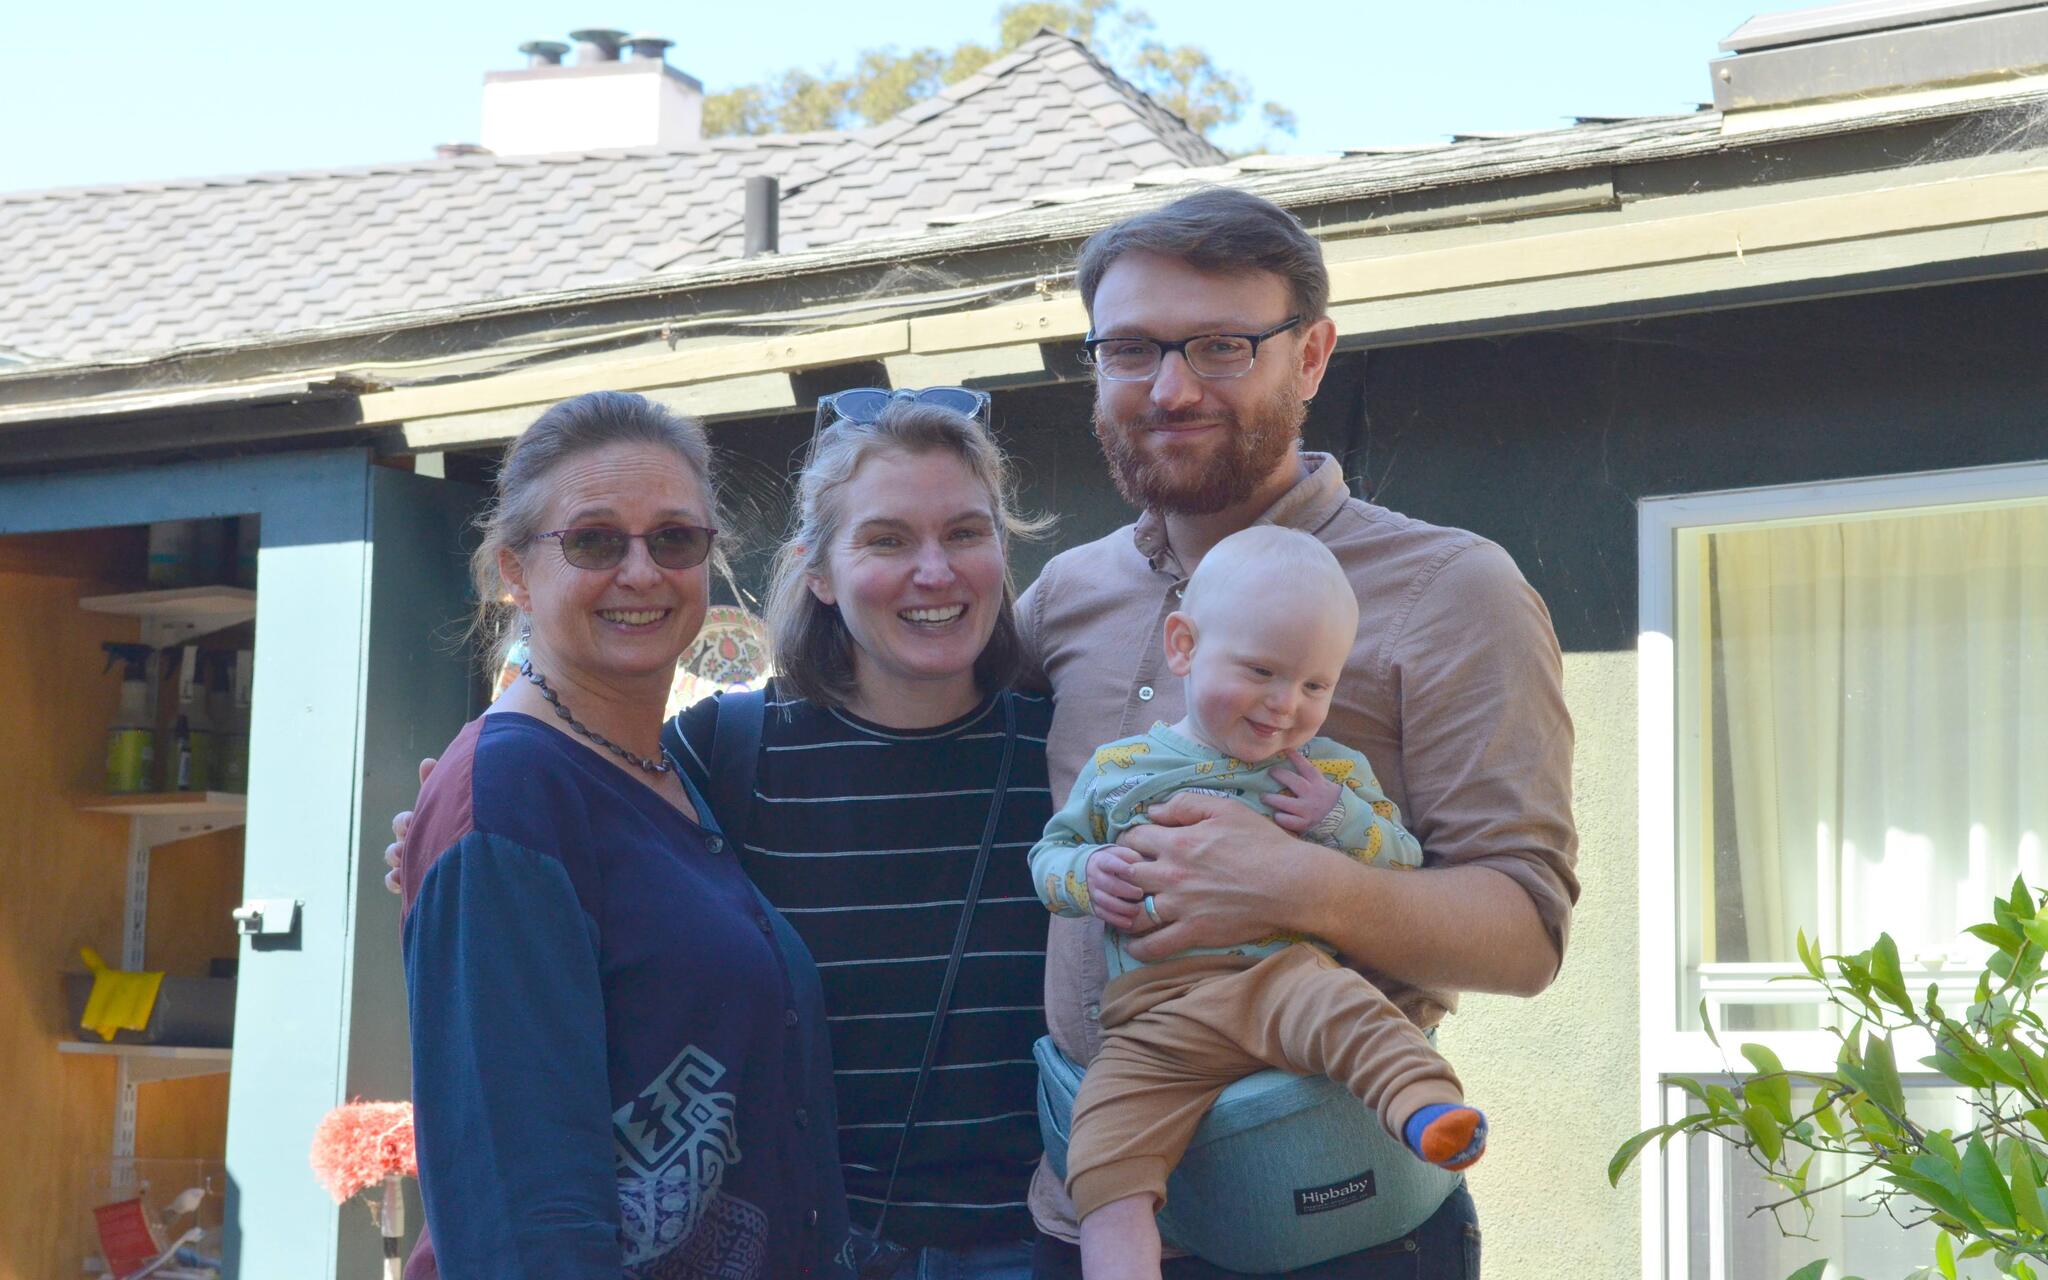 The First Jewish Urban Cohousing Community Opens to Families: A New Beginning